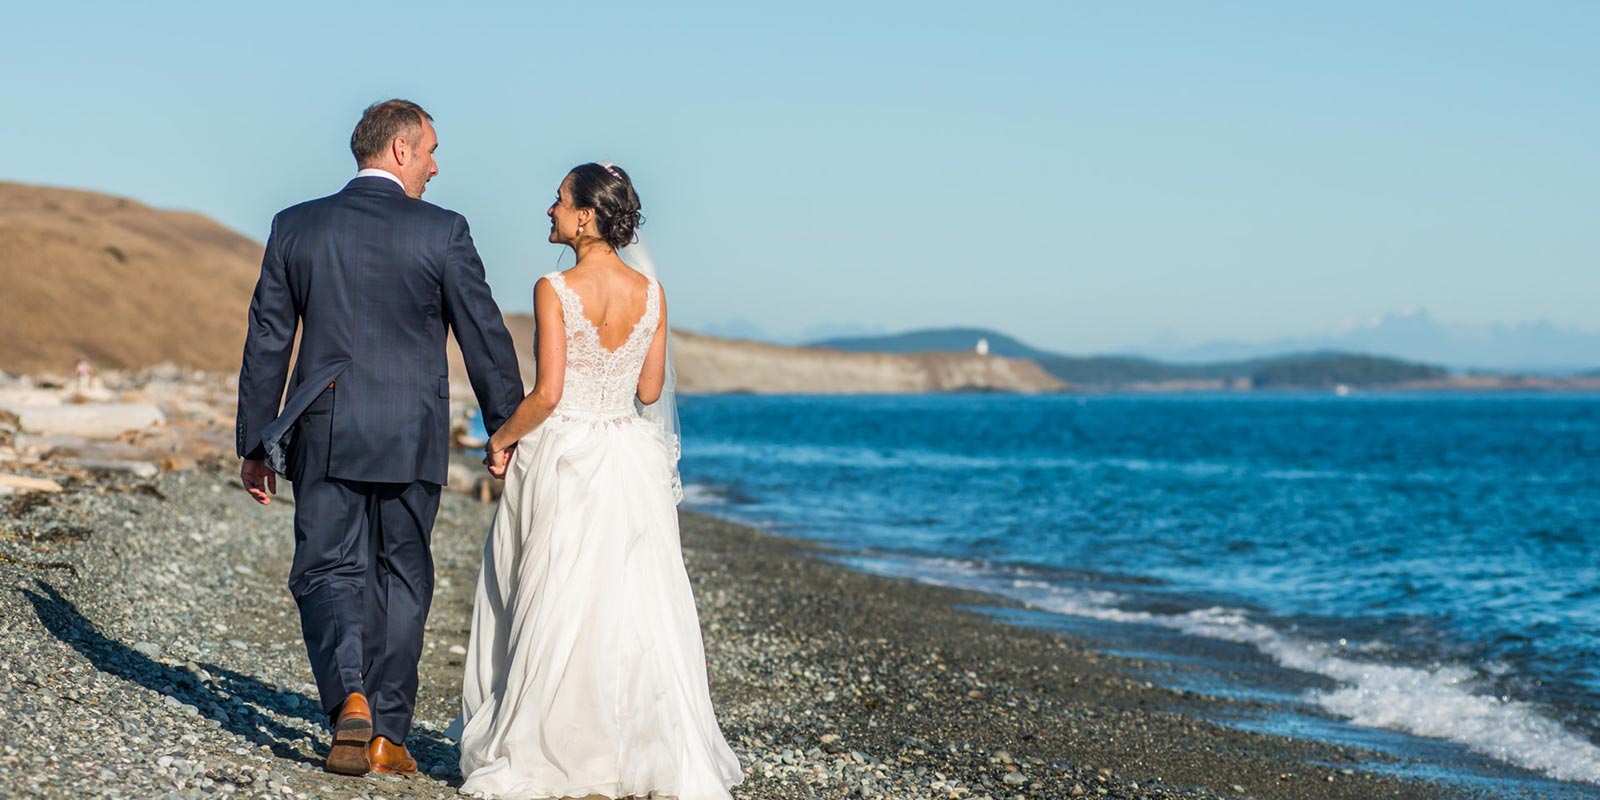 A couple enjoying a romantic moment on the beach during their wedding - something that's possible when you choose our San Juan Island wedding venues